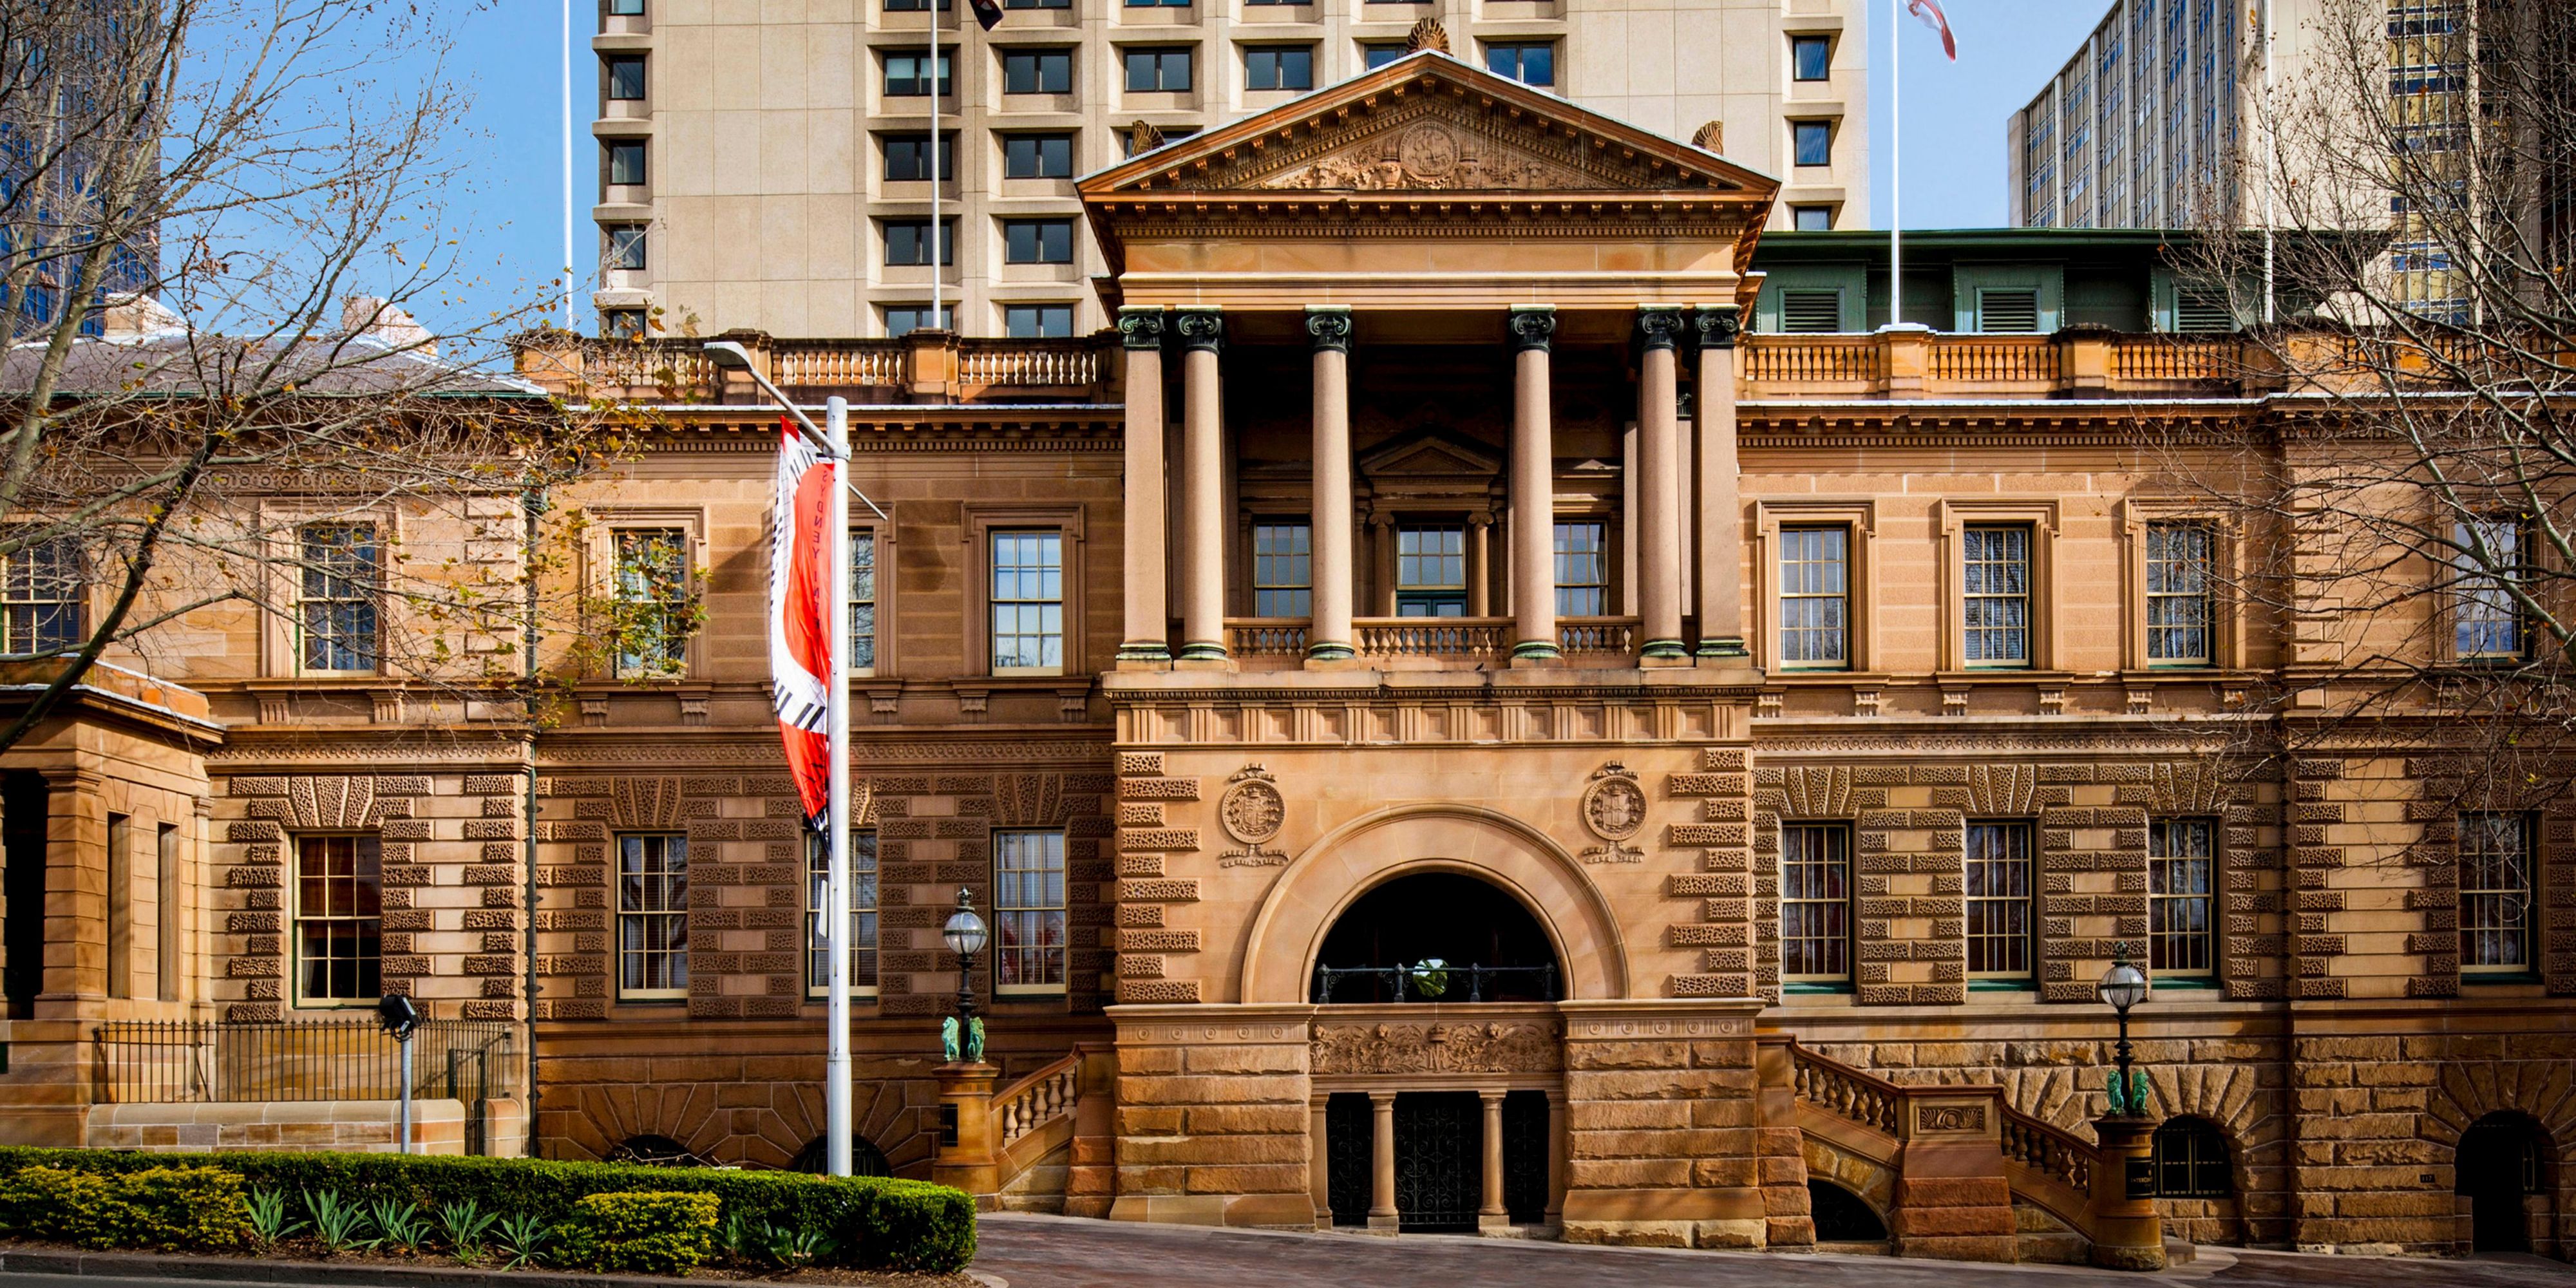 Our hotel rests within the Treasury Building of 1851, rich with 19th century heritage. This building, with its intricate¬ architectural façade, was the first purpose-built government office in Sydney¬. Our building houses the oldest operating lift in the Southern Hemisphere, the first vault in Australia, and is the birthplace of the first grapes cu